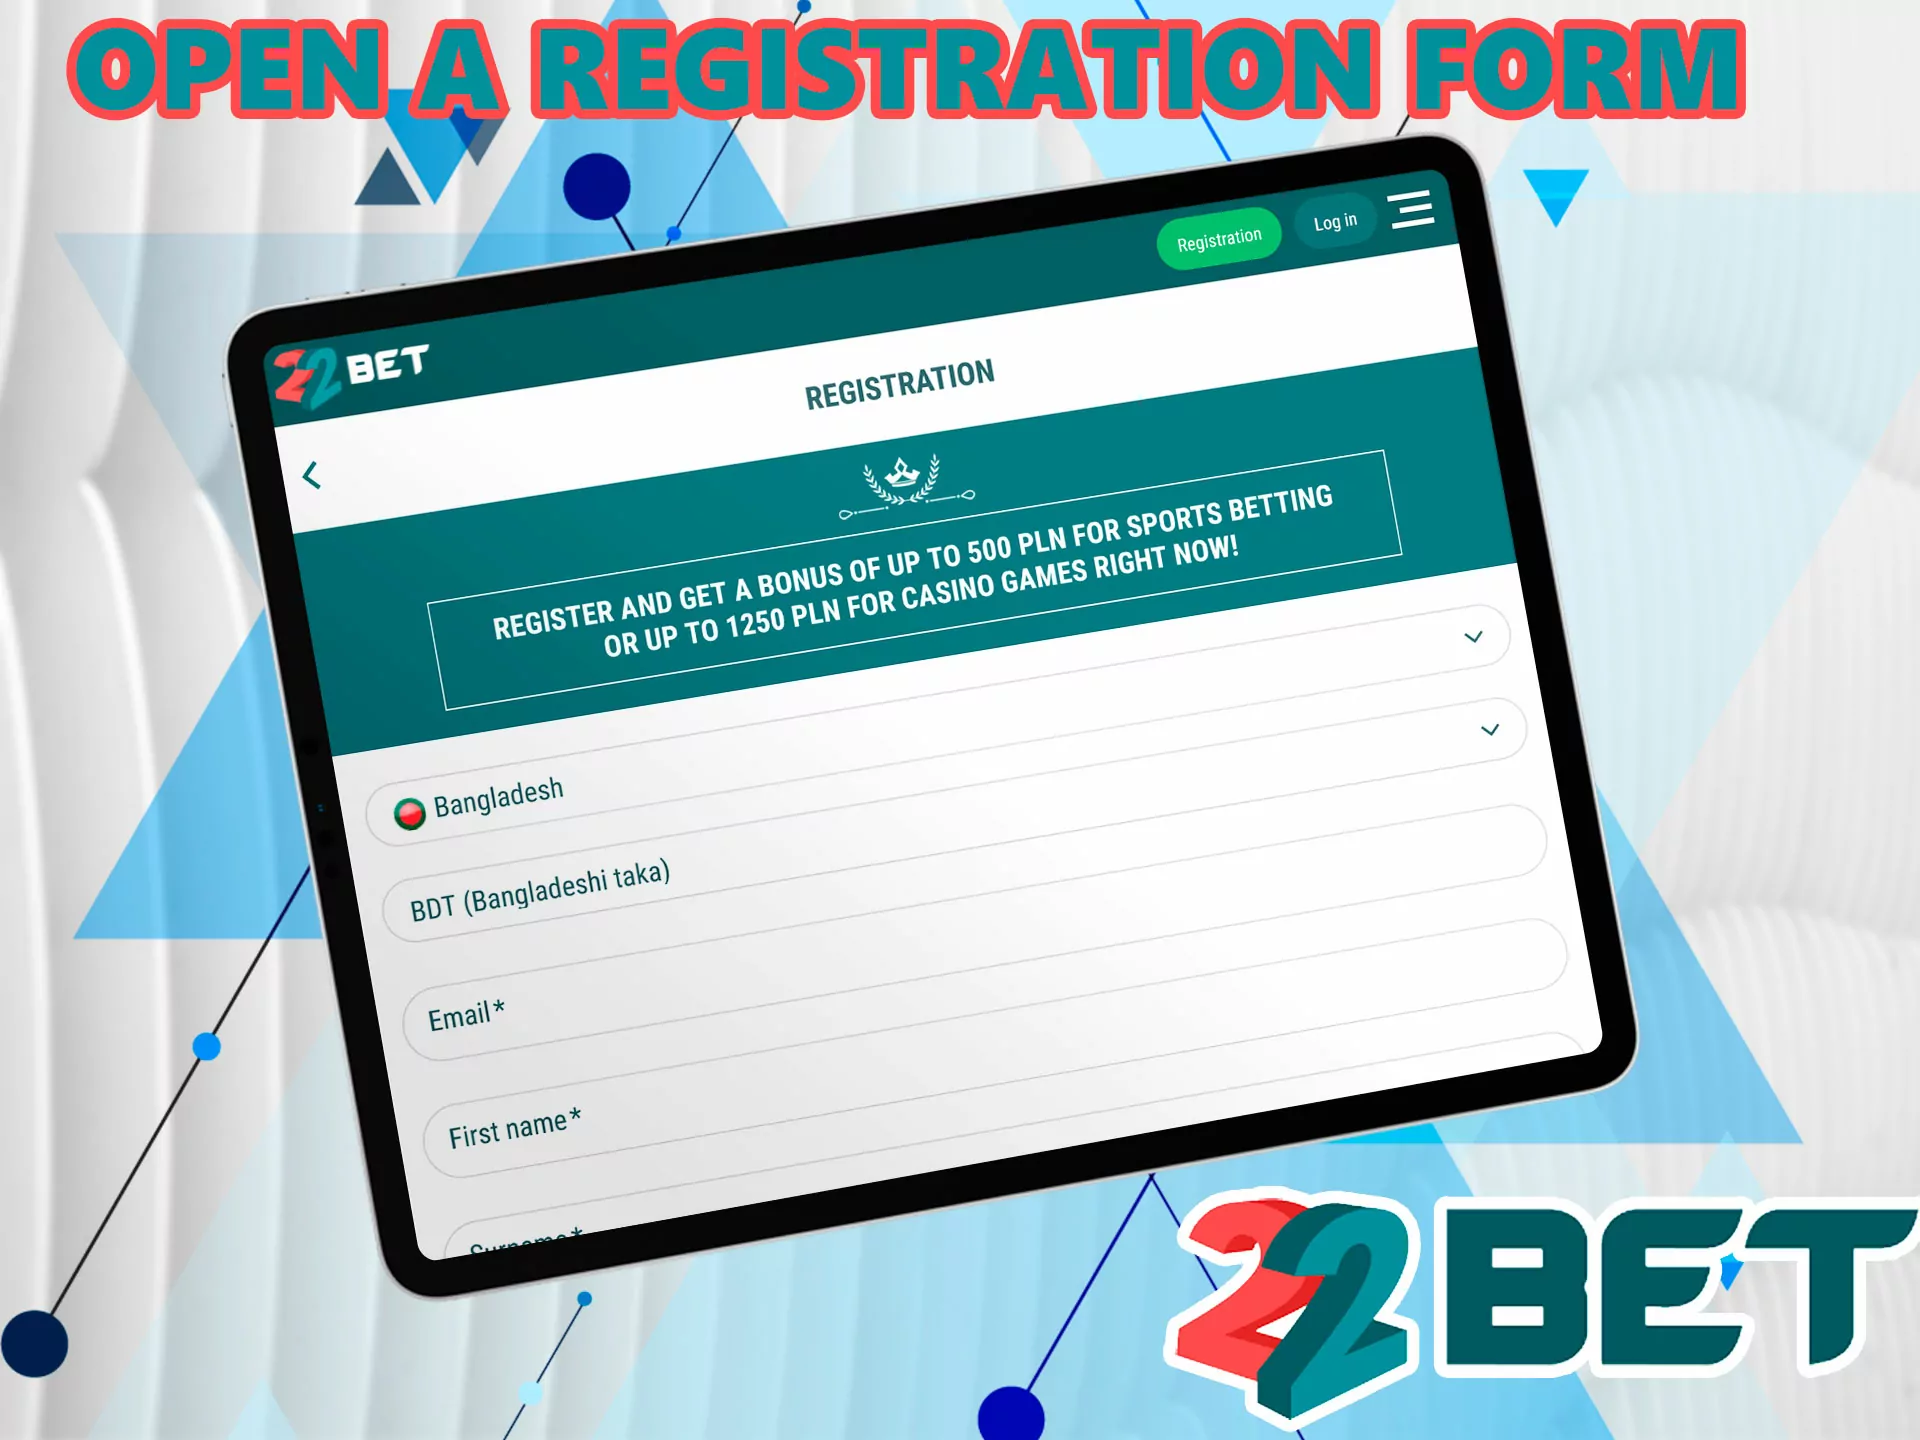 Next, you need to press the button on the main page in the header: "Registration".